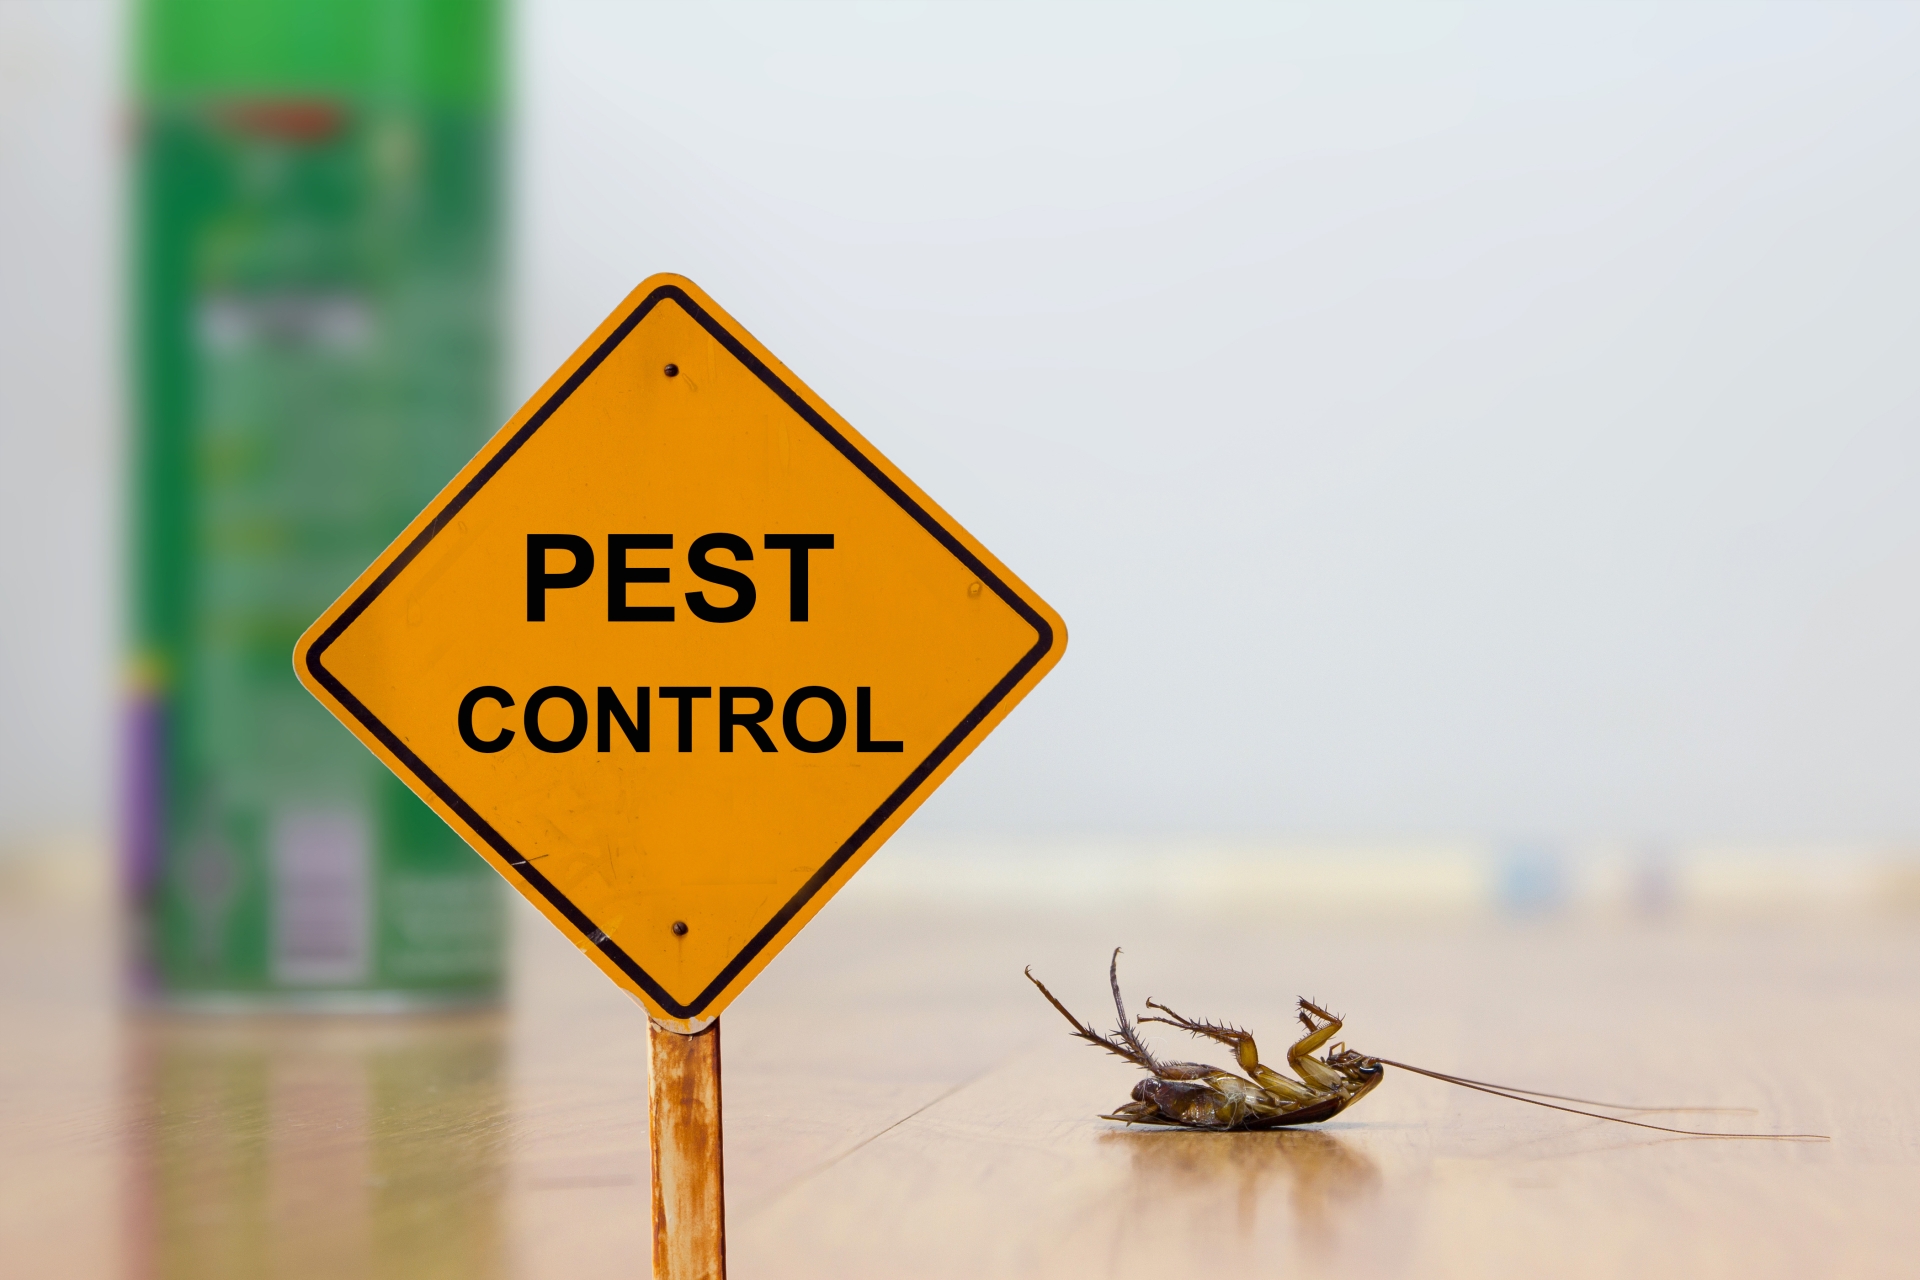 24 Hour Pest Control, Pest Control in Orsett, Chafford Hundred, RM16. Call Now 020 8166 9746